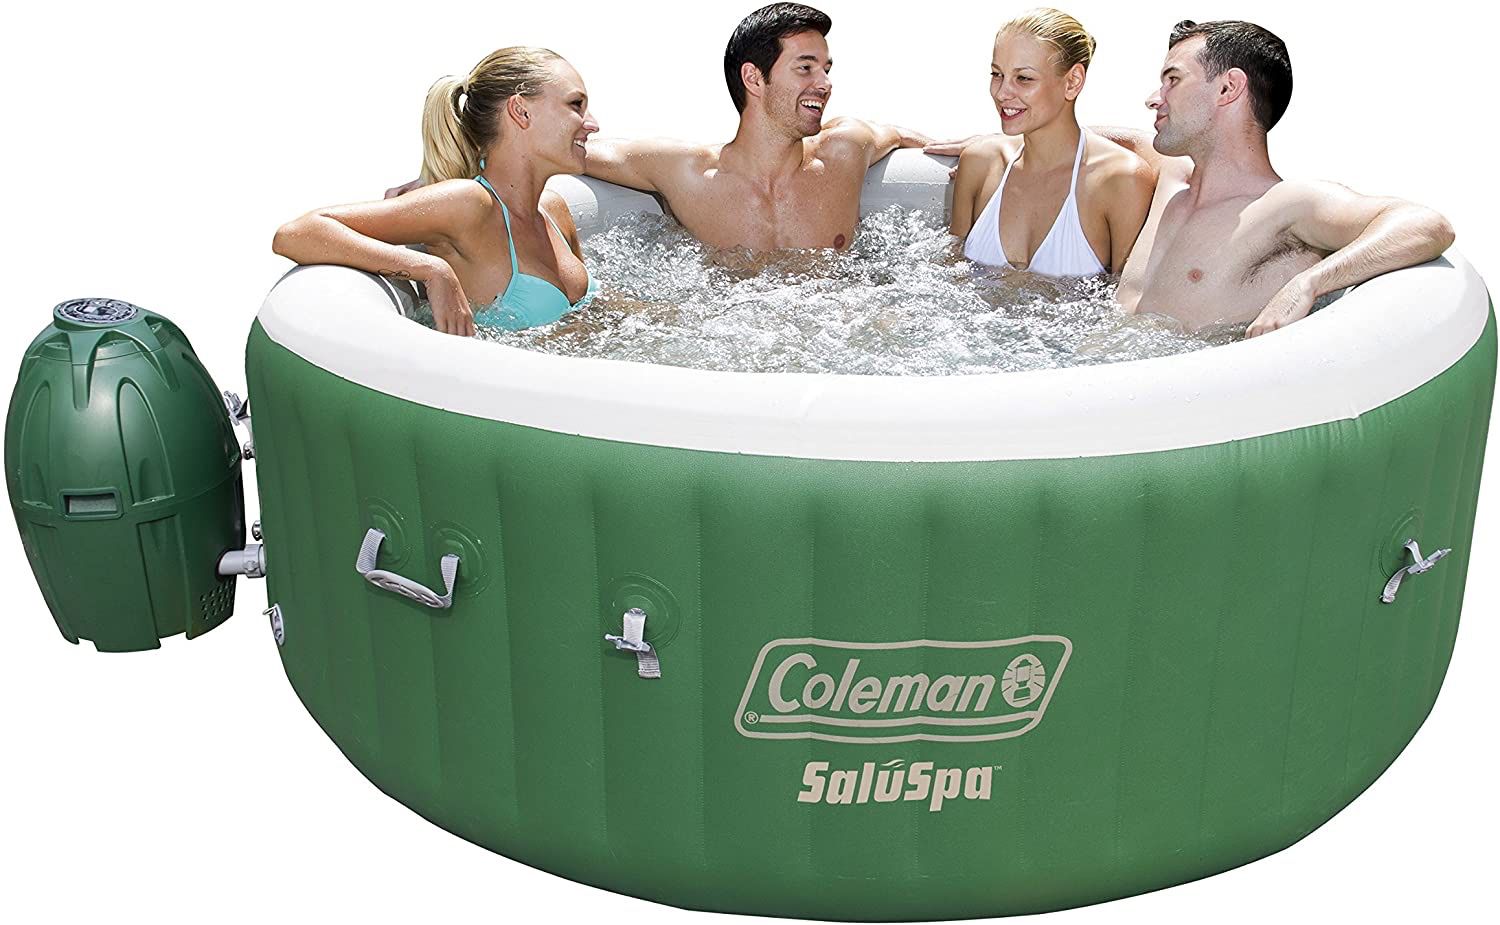 Coleman Hot Tub! Brand new in box!